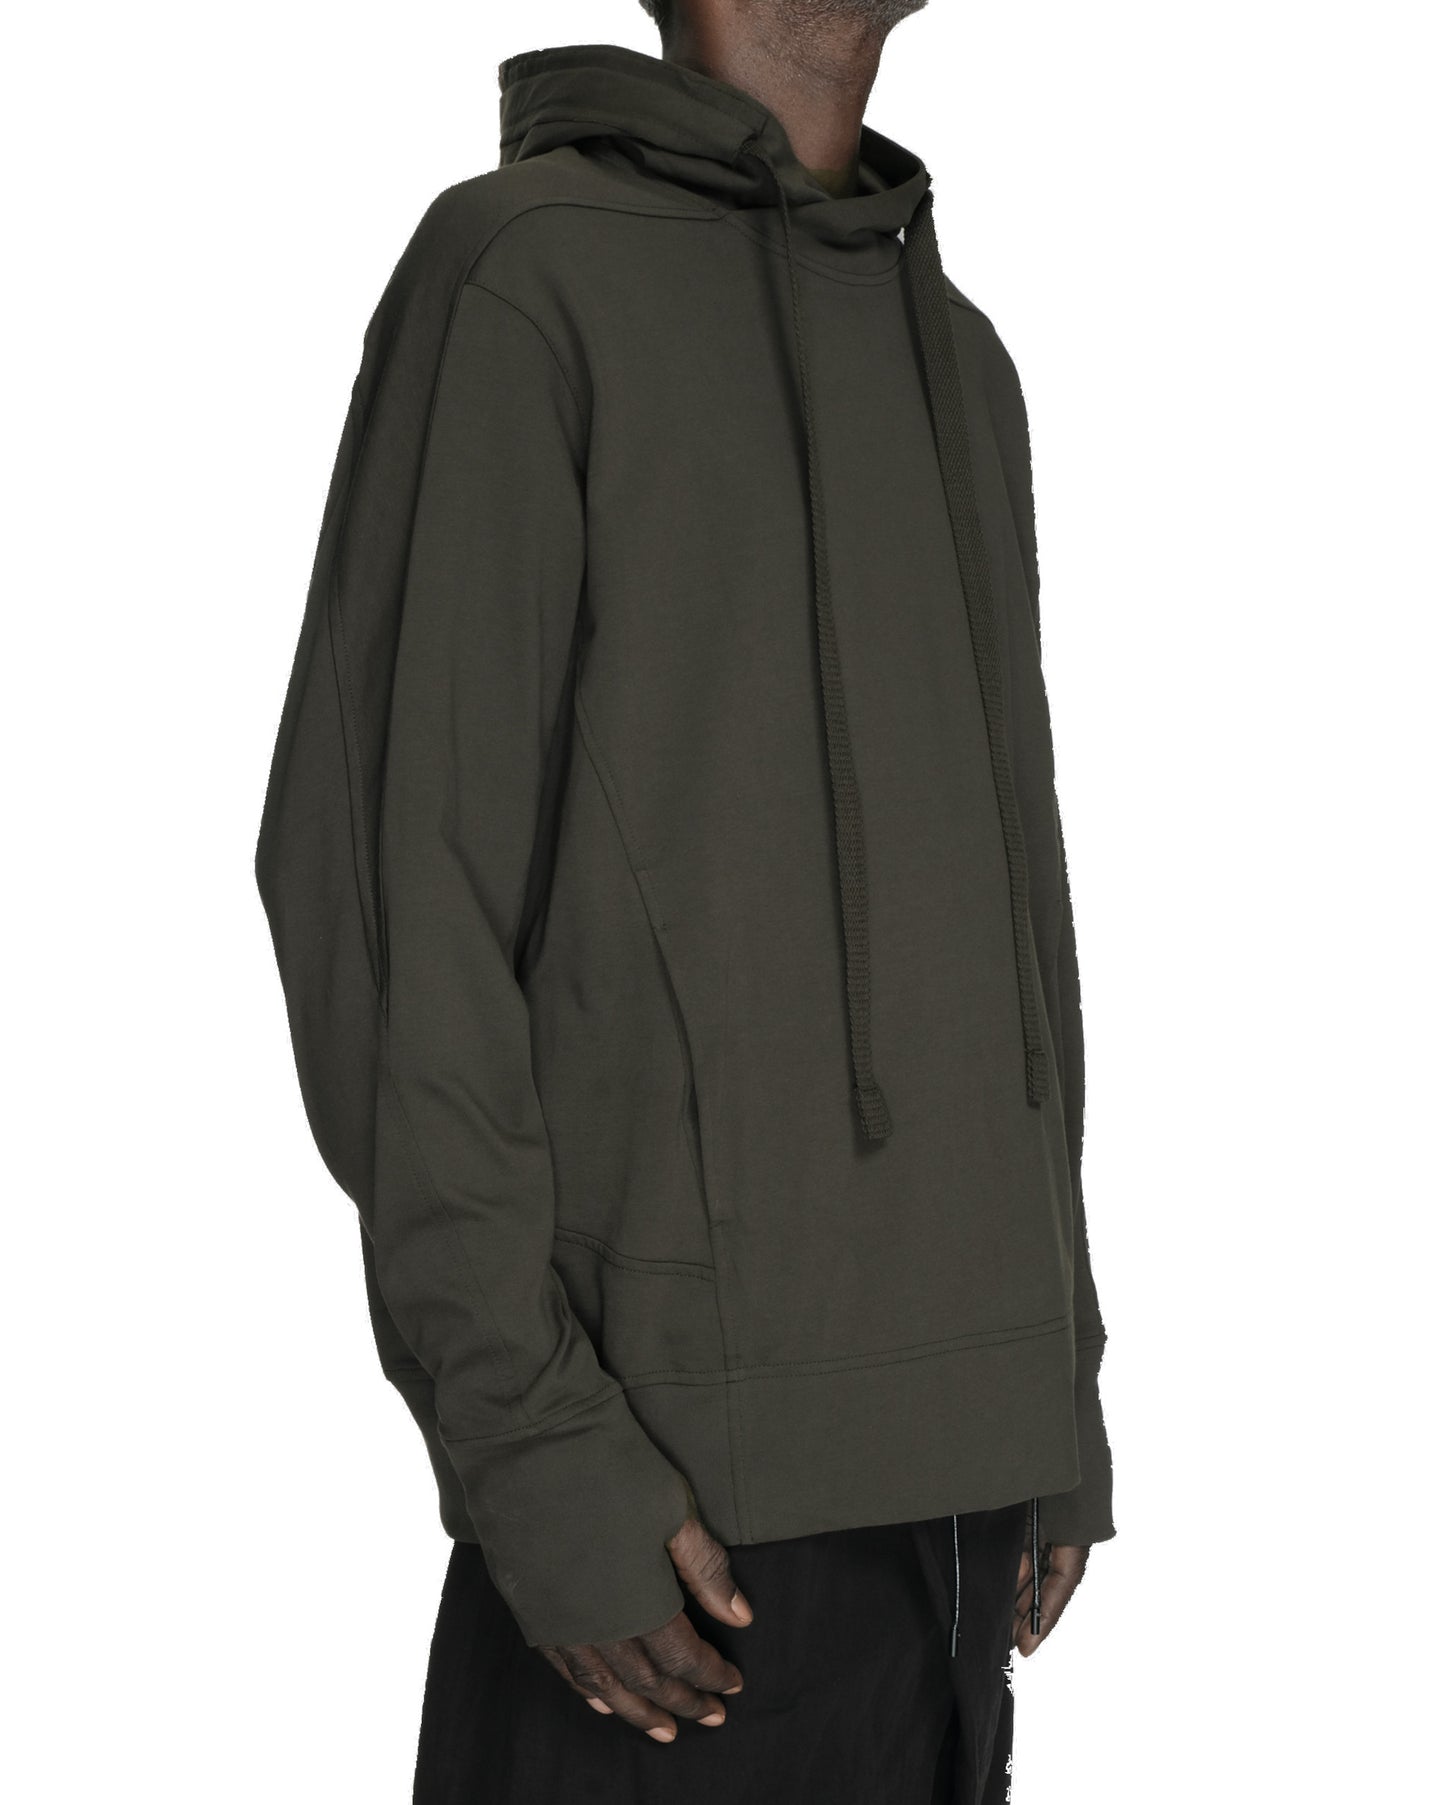 VIC HOODED SWEATER